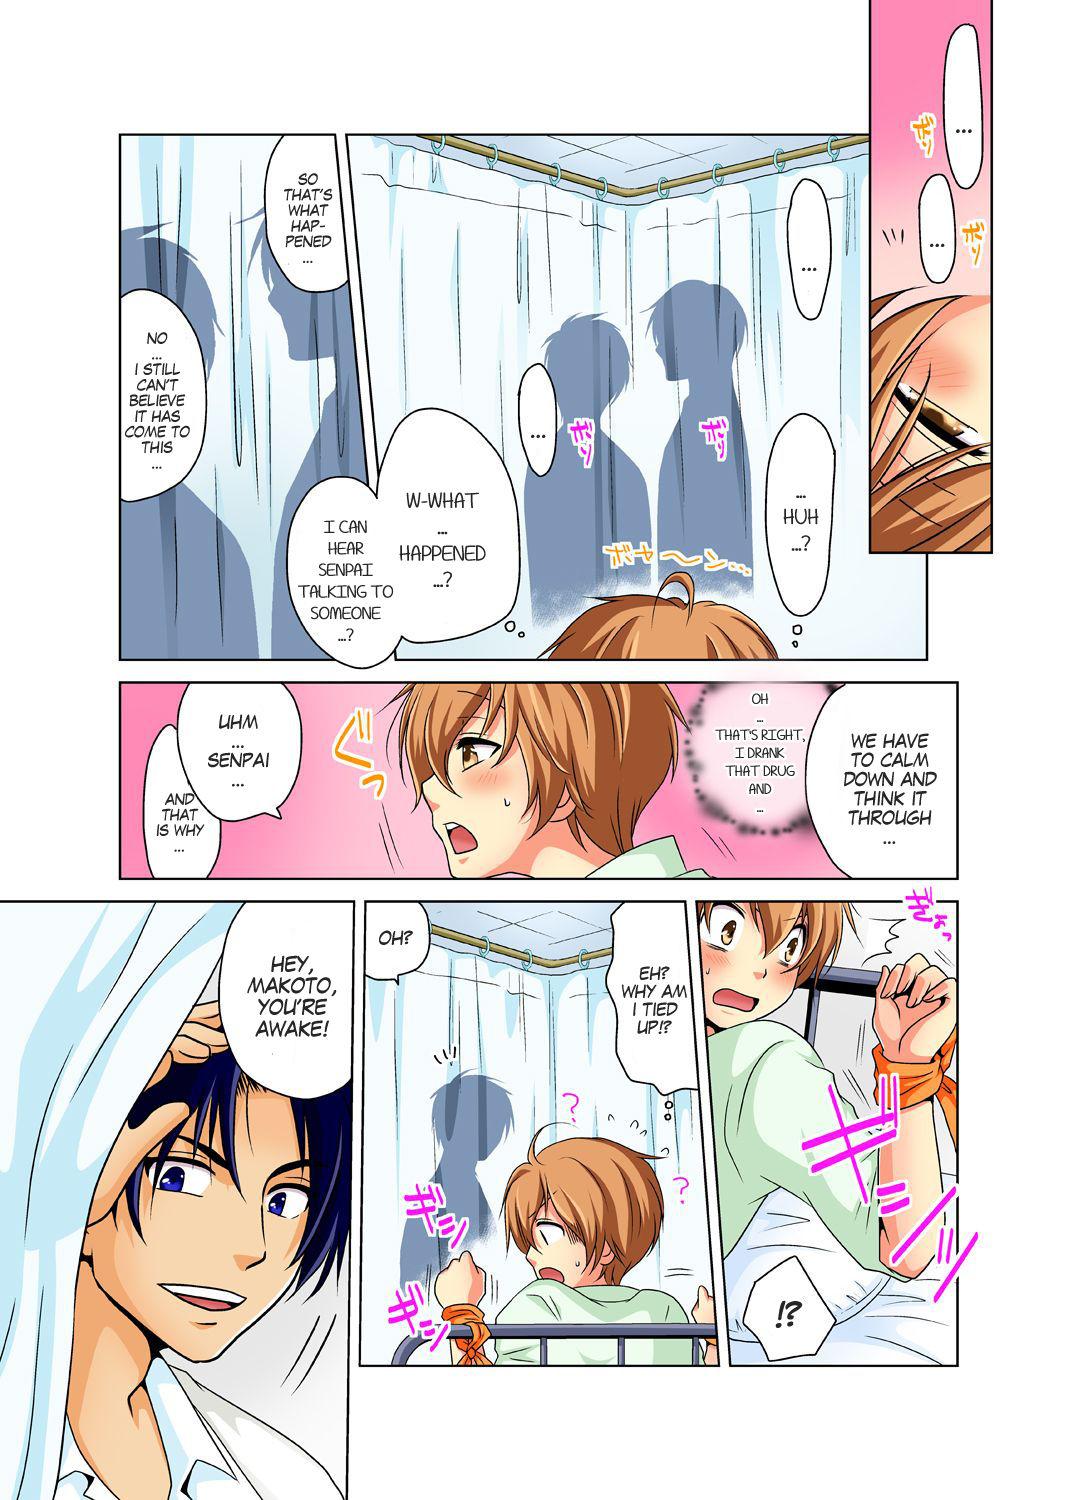 Culote Nyotaika de Ecchi Kenshin!? Mirudake tte Itta no ni... 1 | Gender Bender Into Sexy Medical Examination! You said that you were only going to look... 1 Stepsister - Page 5